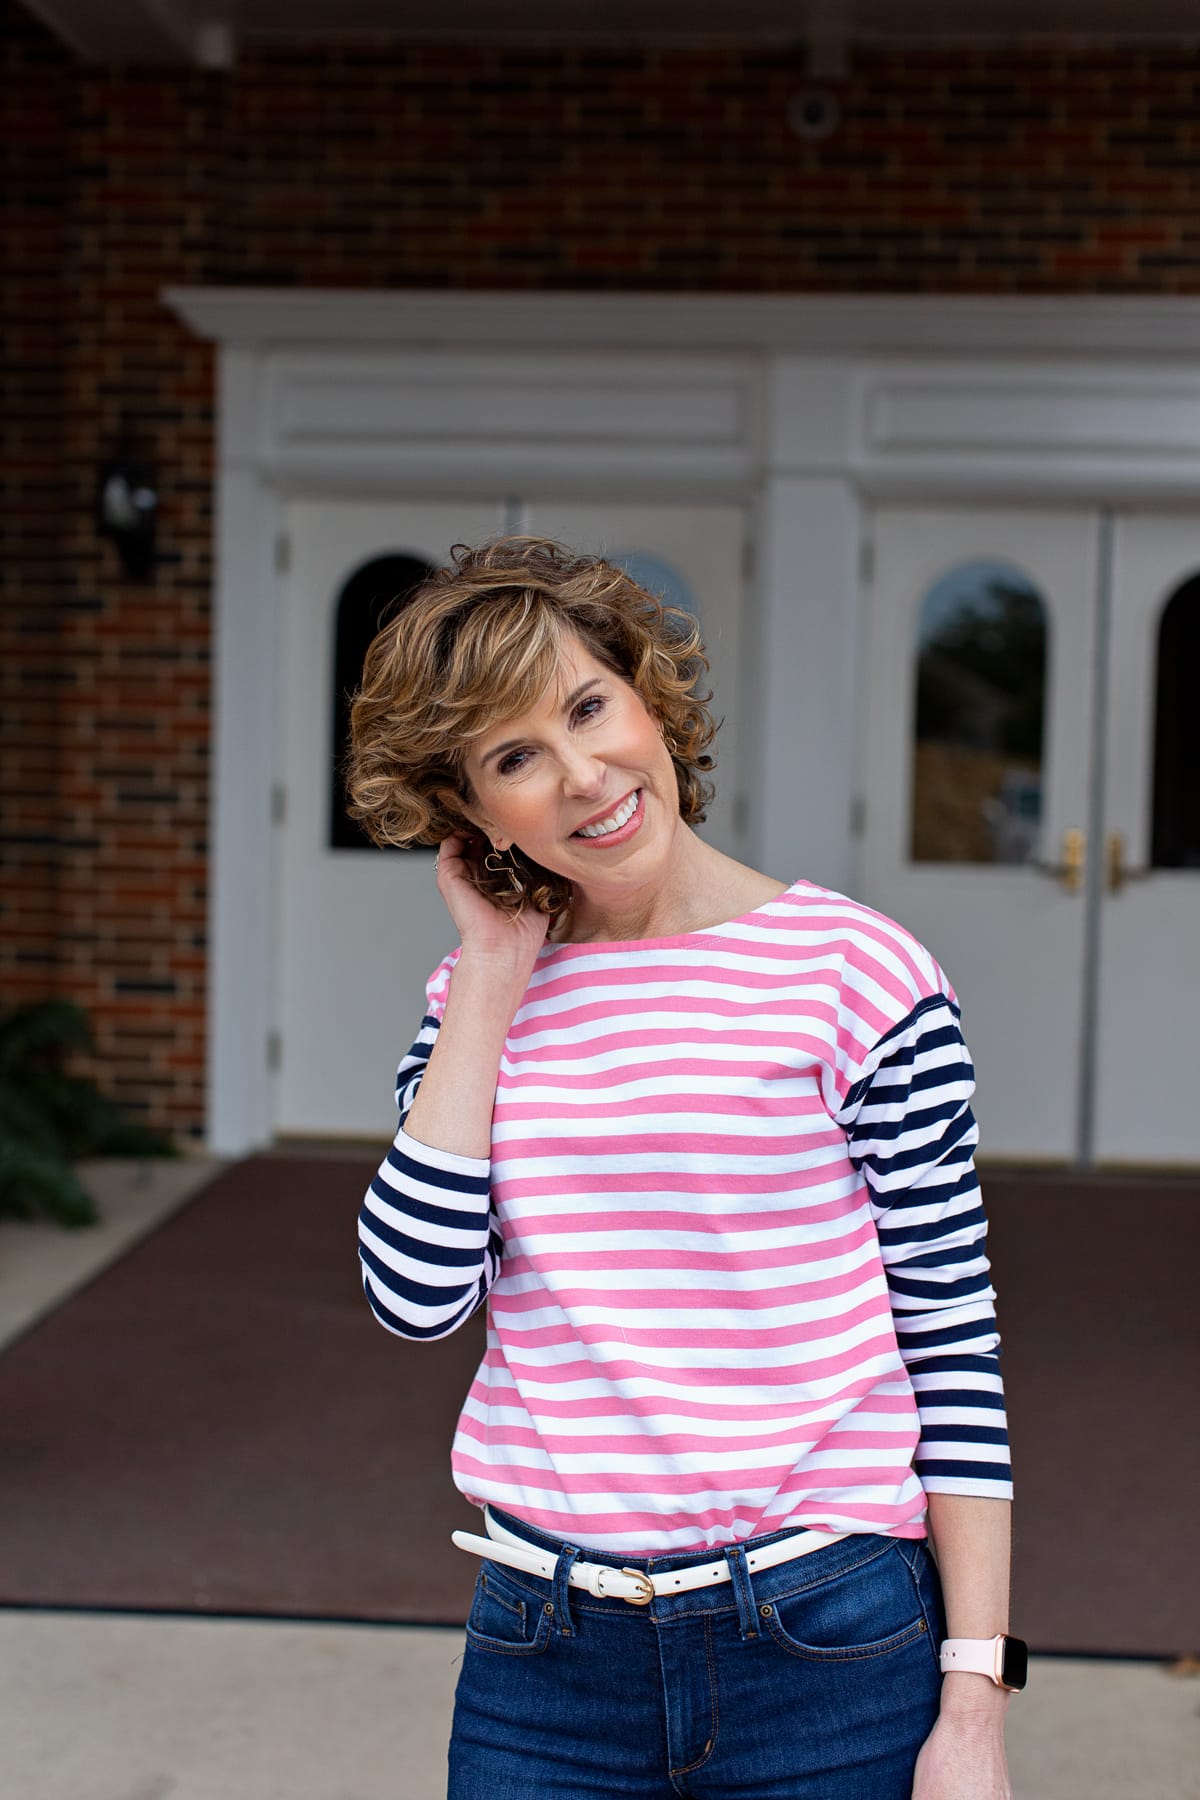 woman wearing striped shirt standing in front of white doors